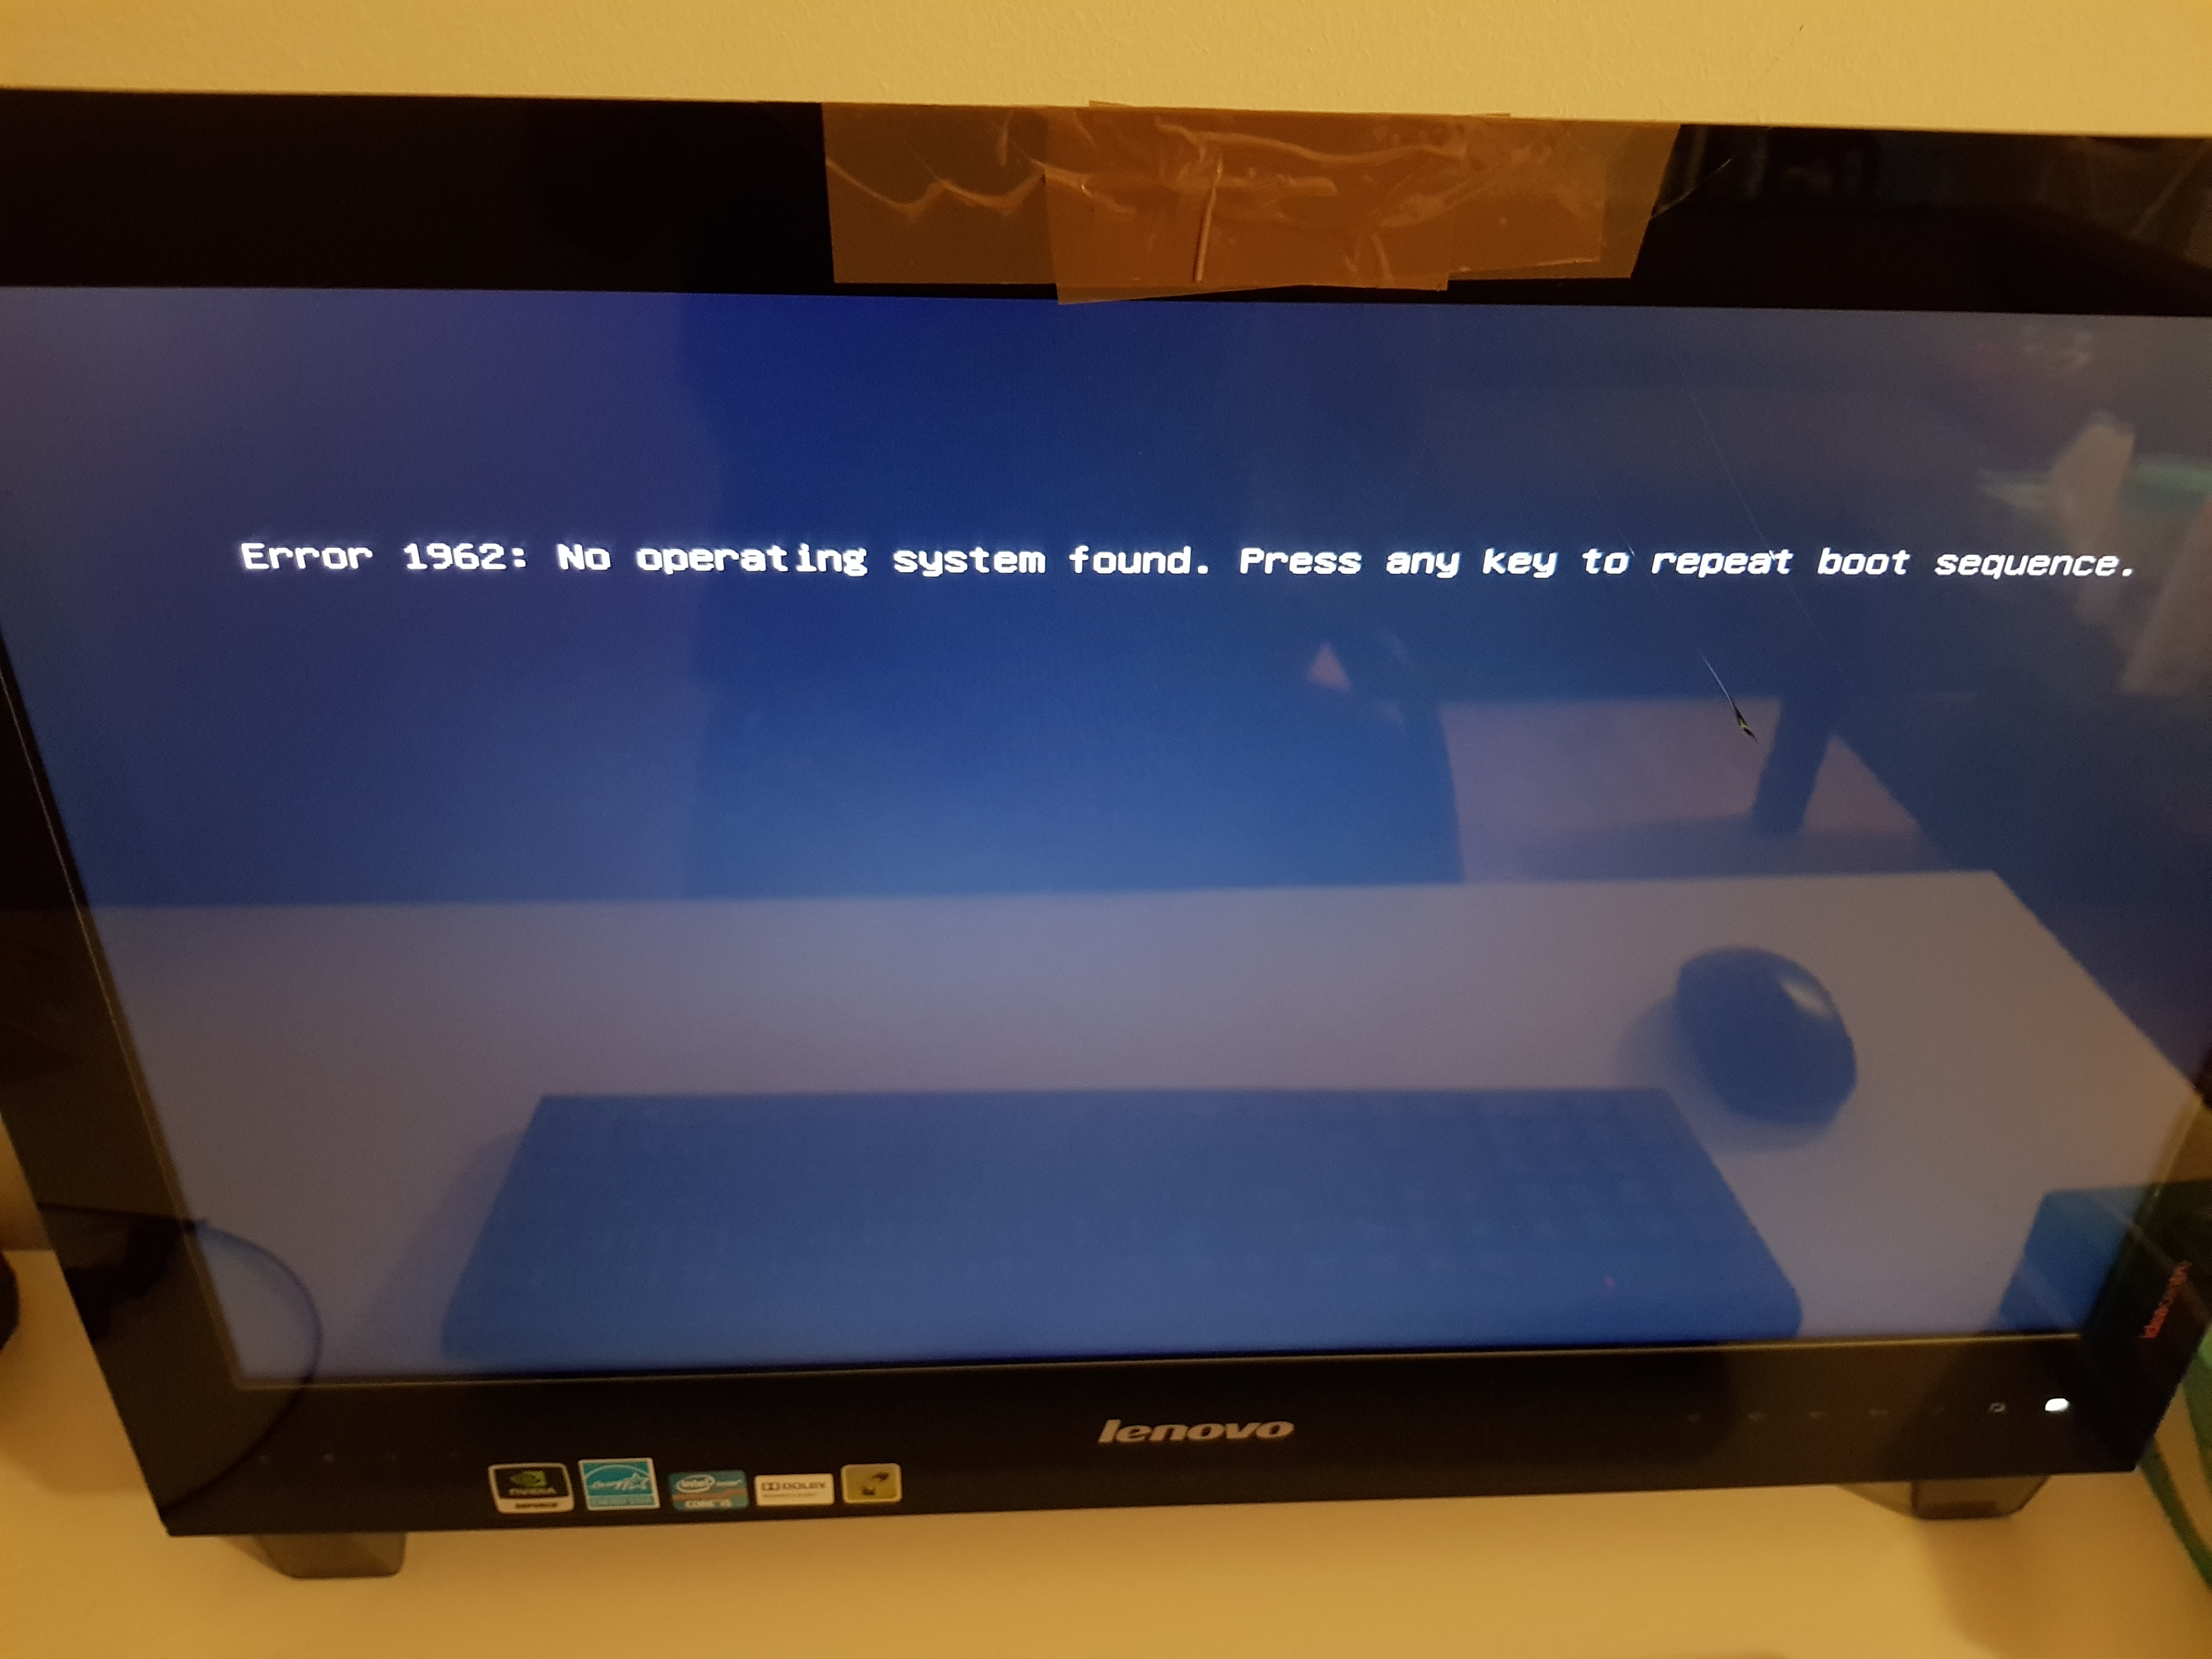 Error 1962: No operating system found. Press any key to repeat boot sequence